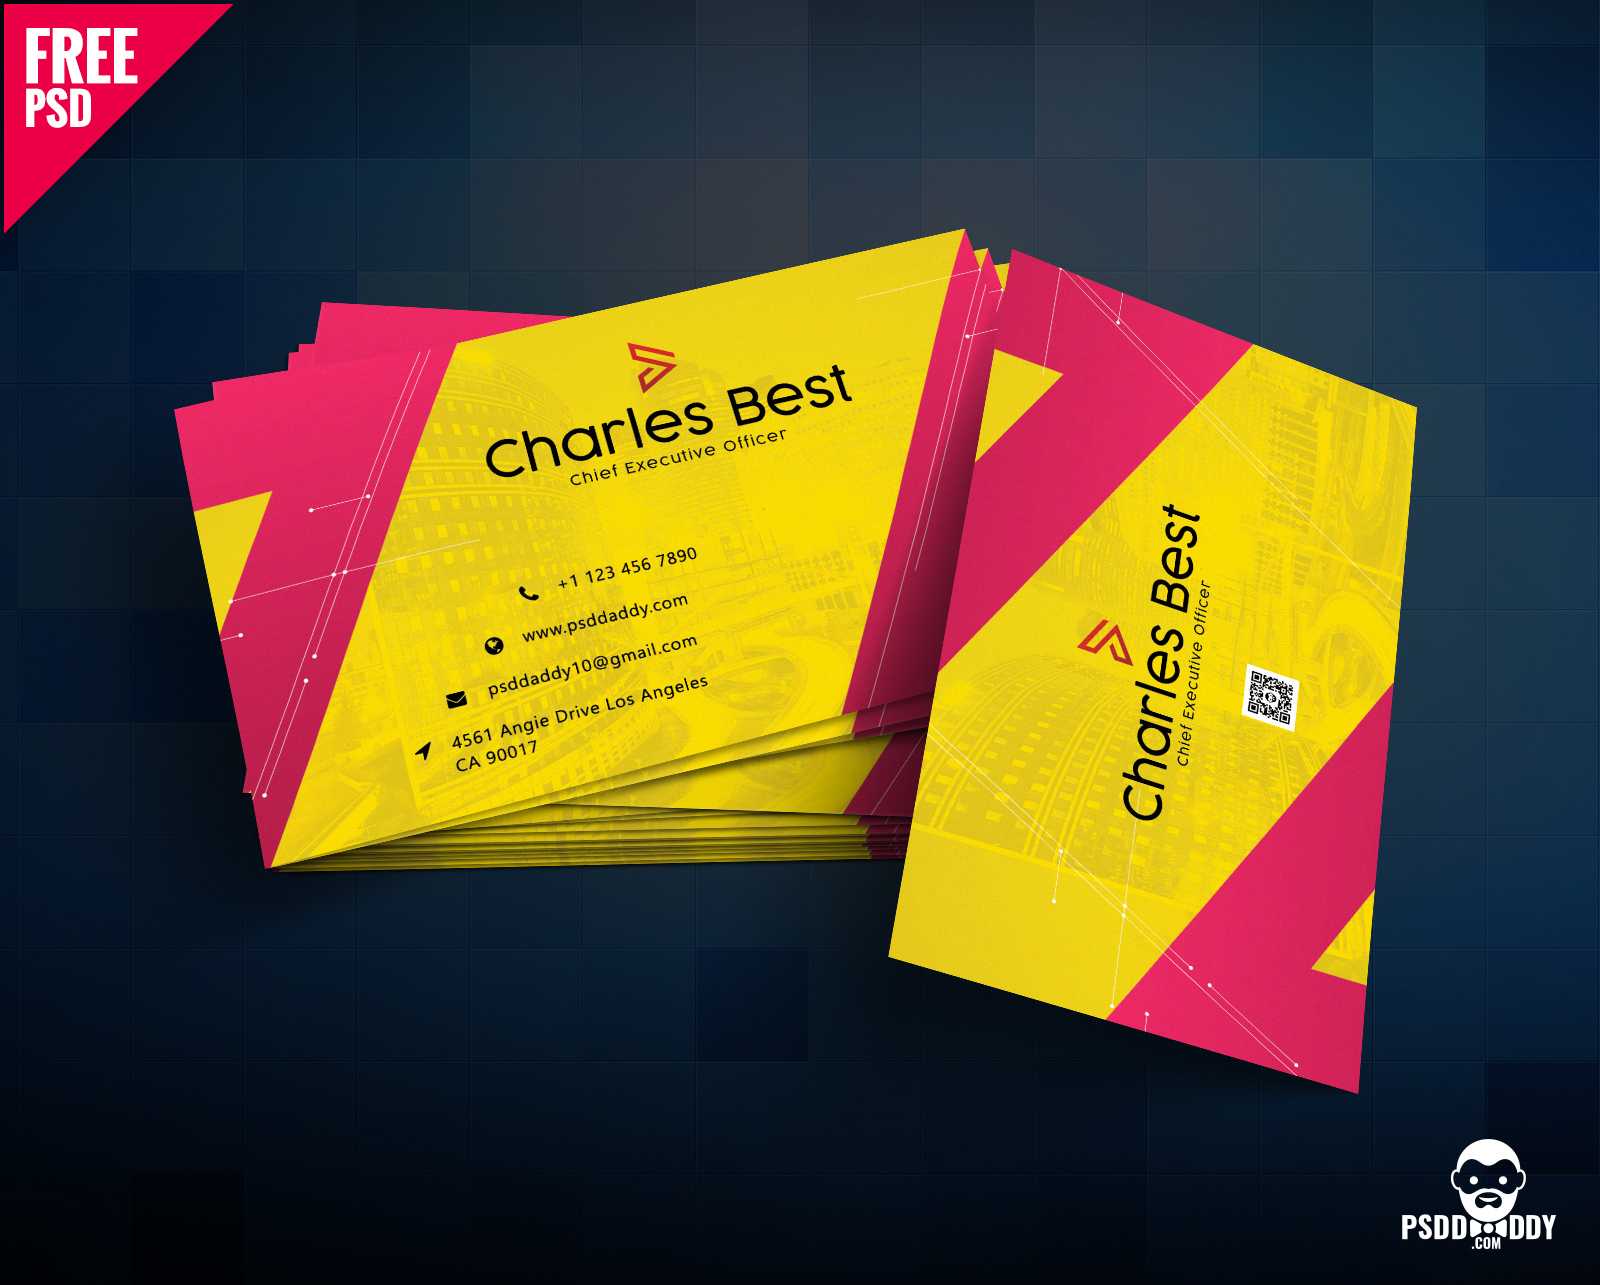 Download] Creative Business Card Free Psd | Psddaddy Intended For Business Card Size Template Psd